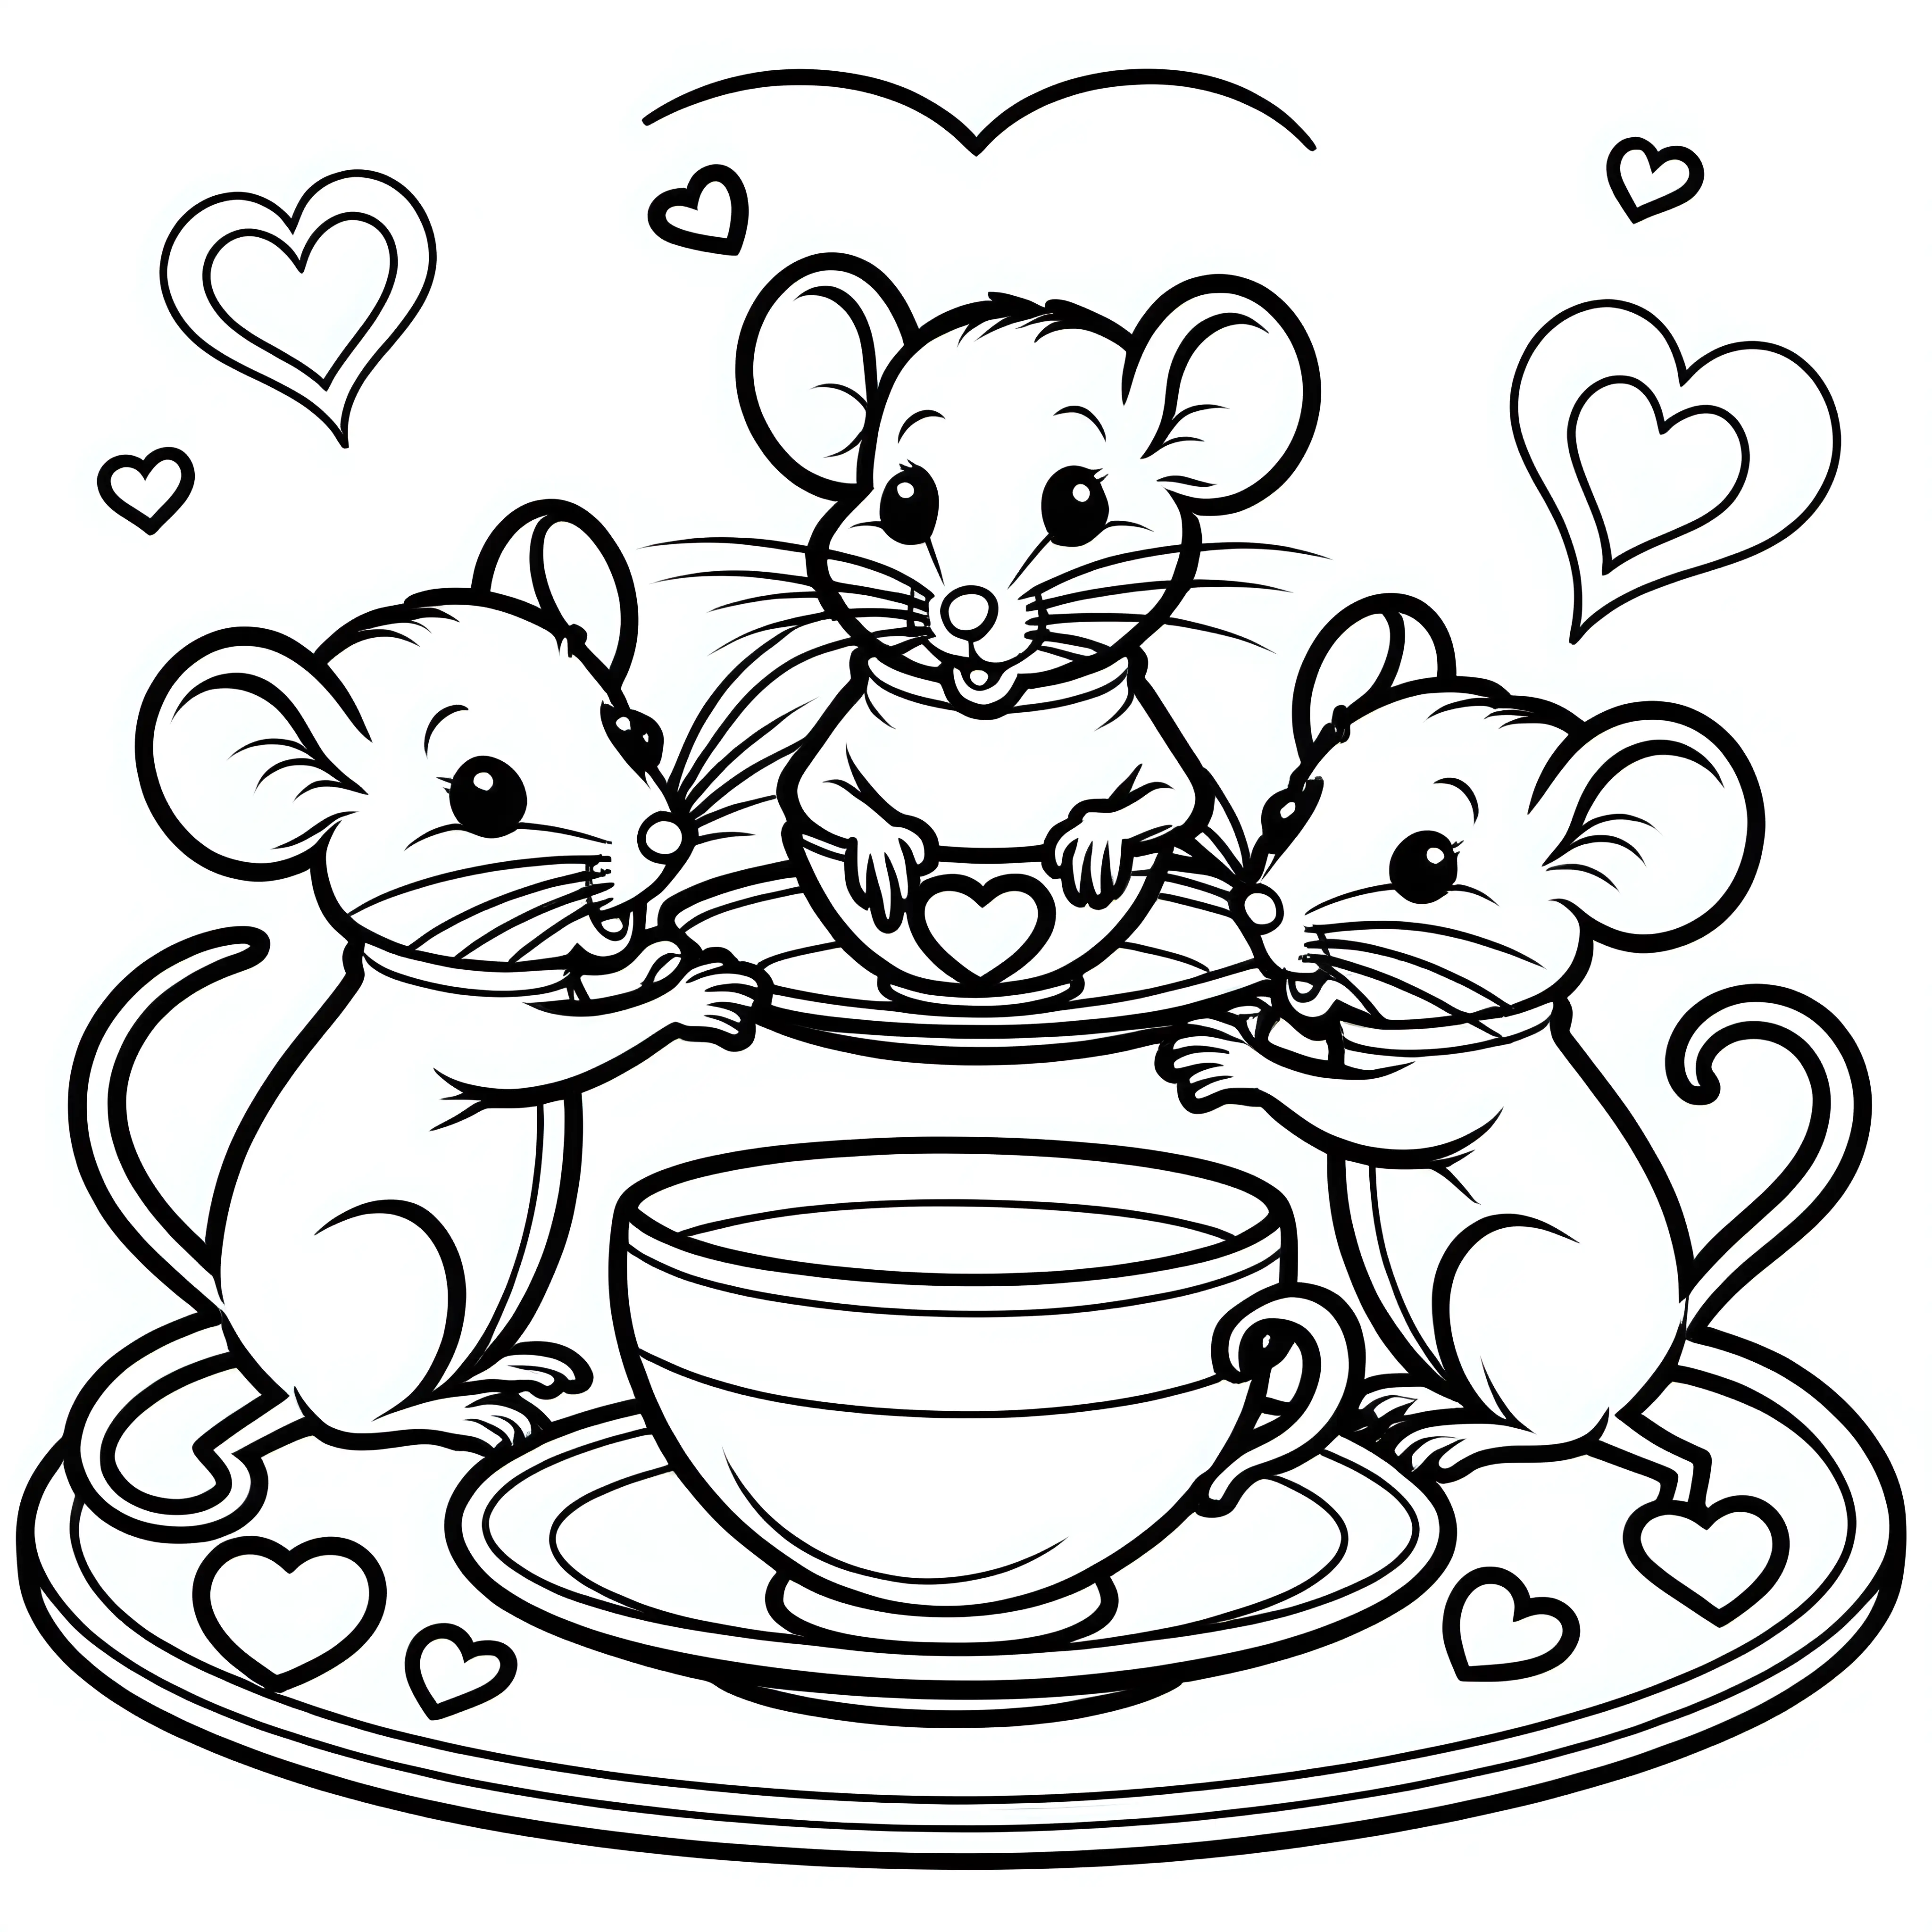 create a black line illustration with a white background. for children's coloring book of mice drinking from teacups decorated with hearts sitting on a table. Use crisp black outlines, no shading. NO Color. 